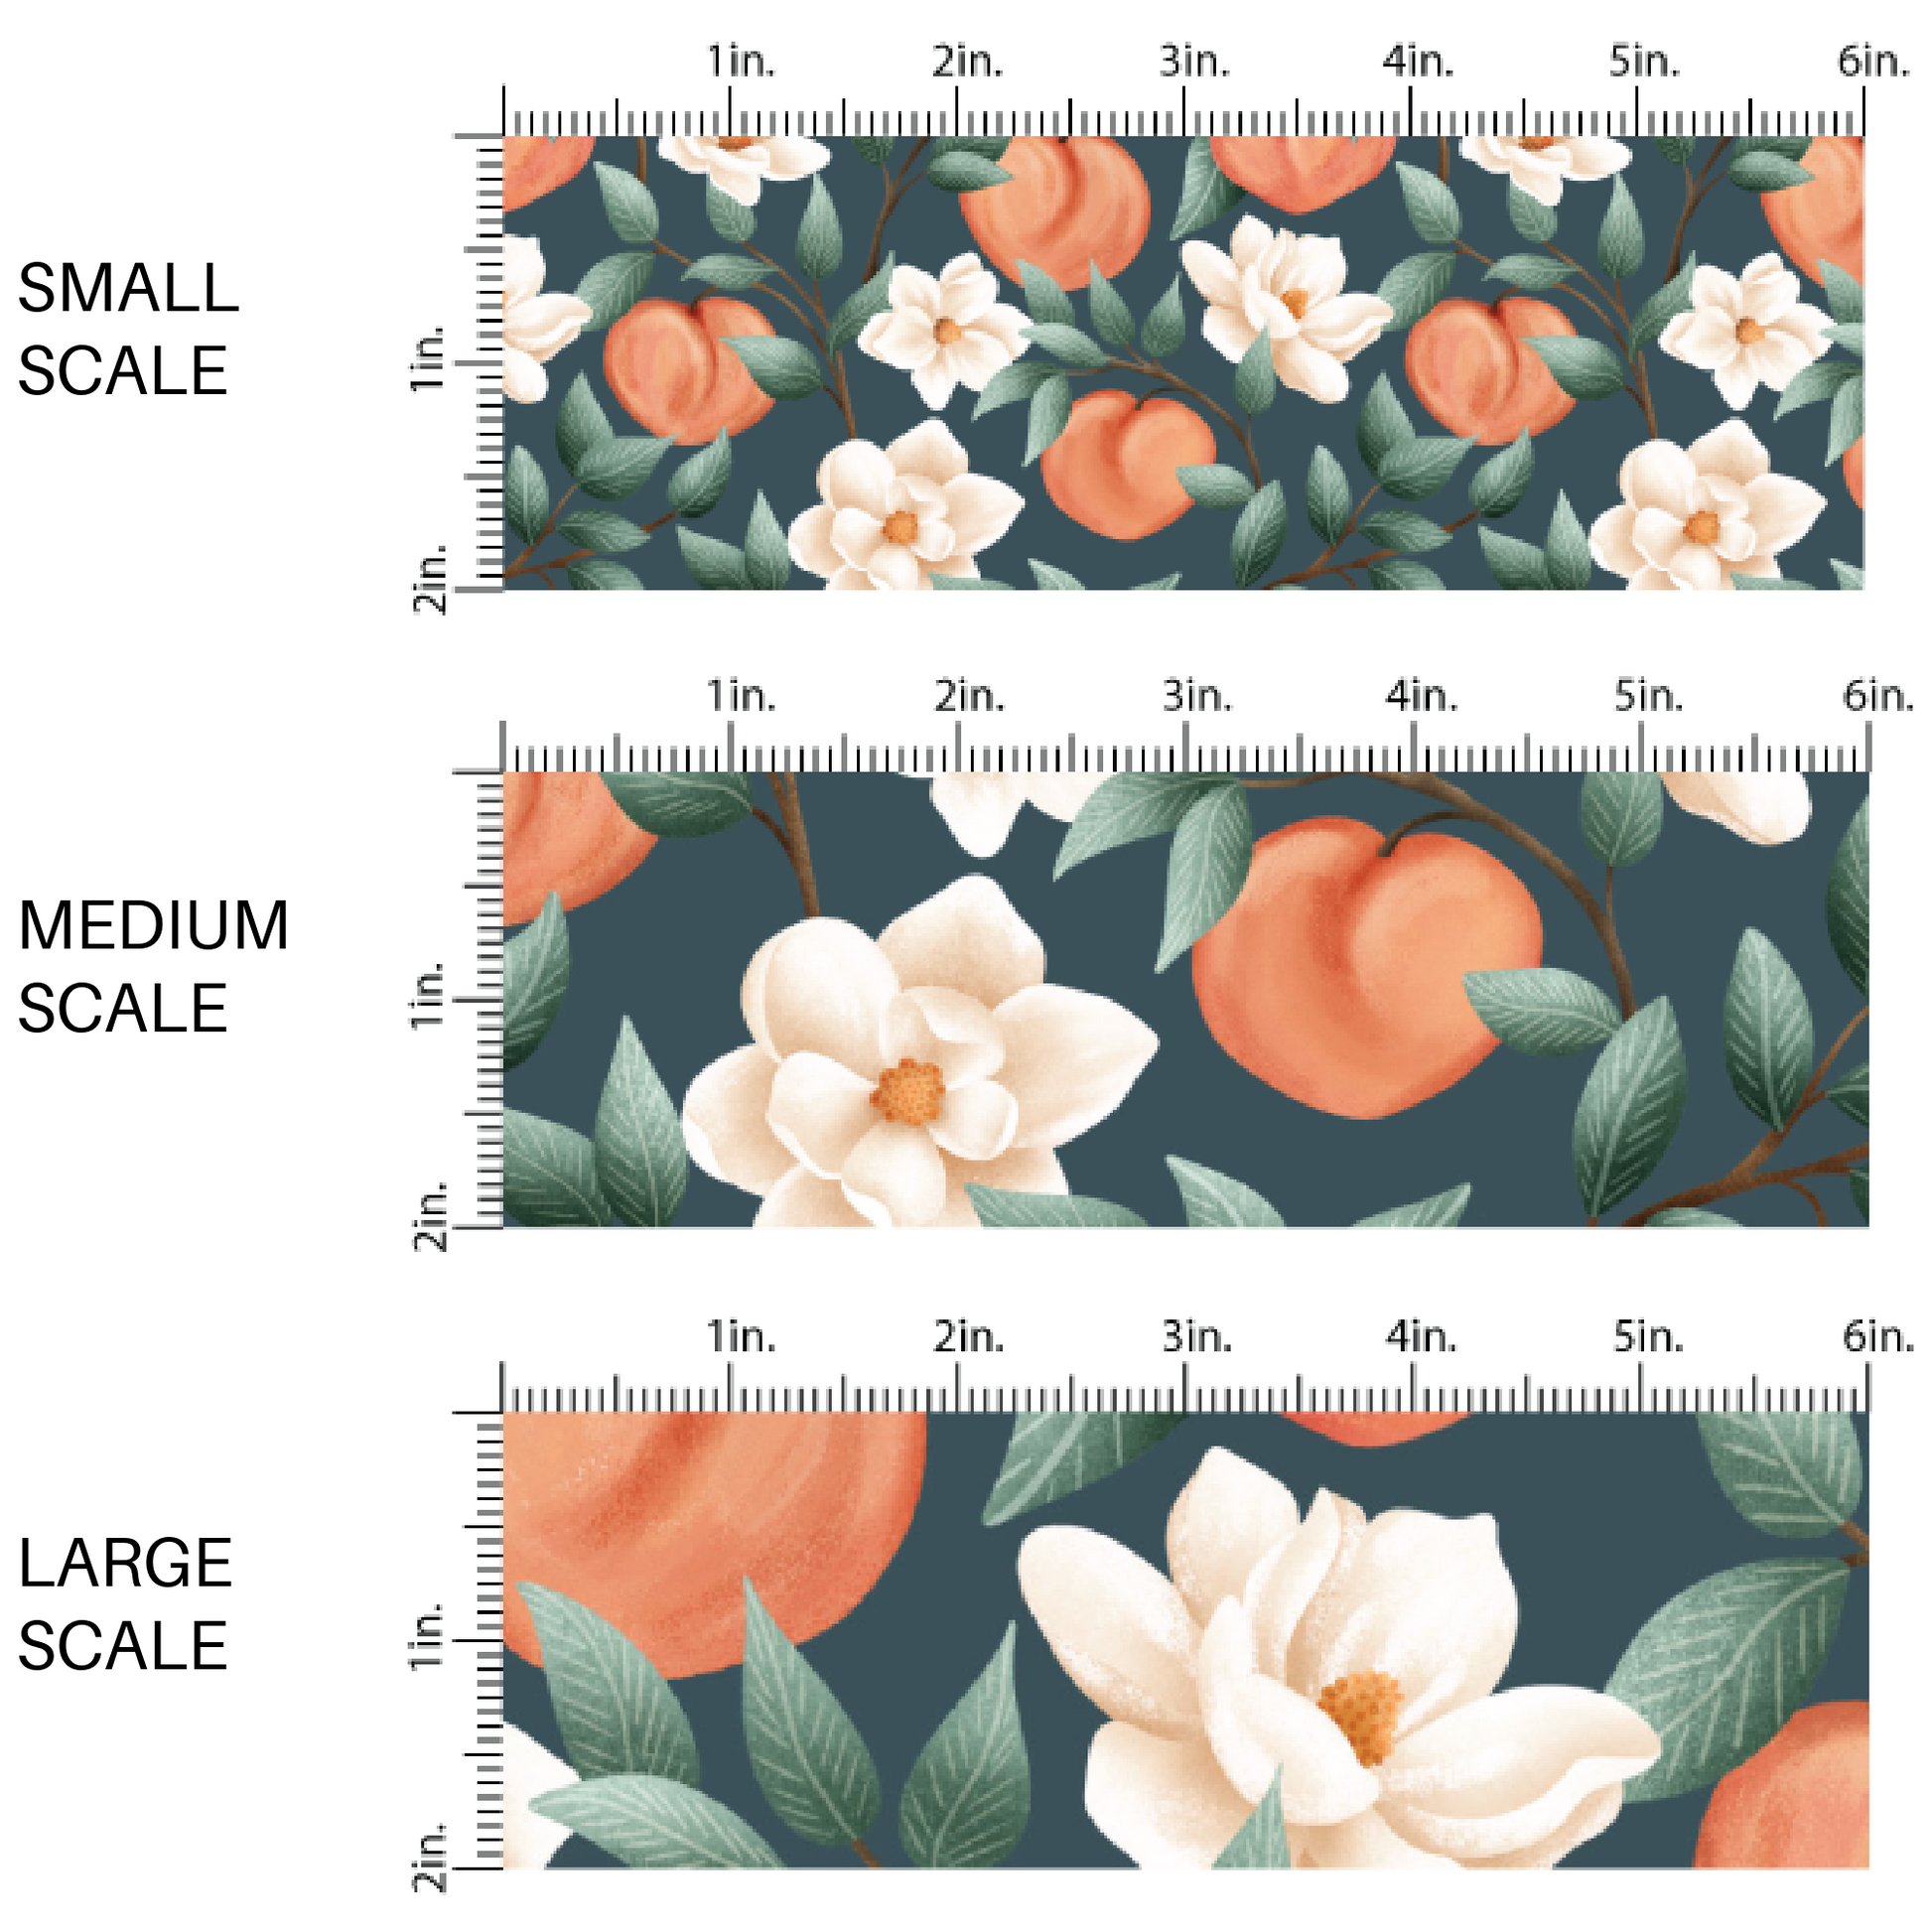 Peach, pink, and green flowers, peaches, dots, and gators on high quality fabric adaptable for all your crafting needs. Make cute baby headwraps, fun girl hairbows, knotted headbands for adults or kids, clothing, and more!